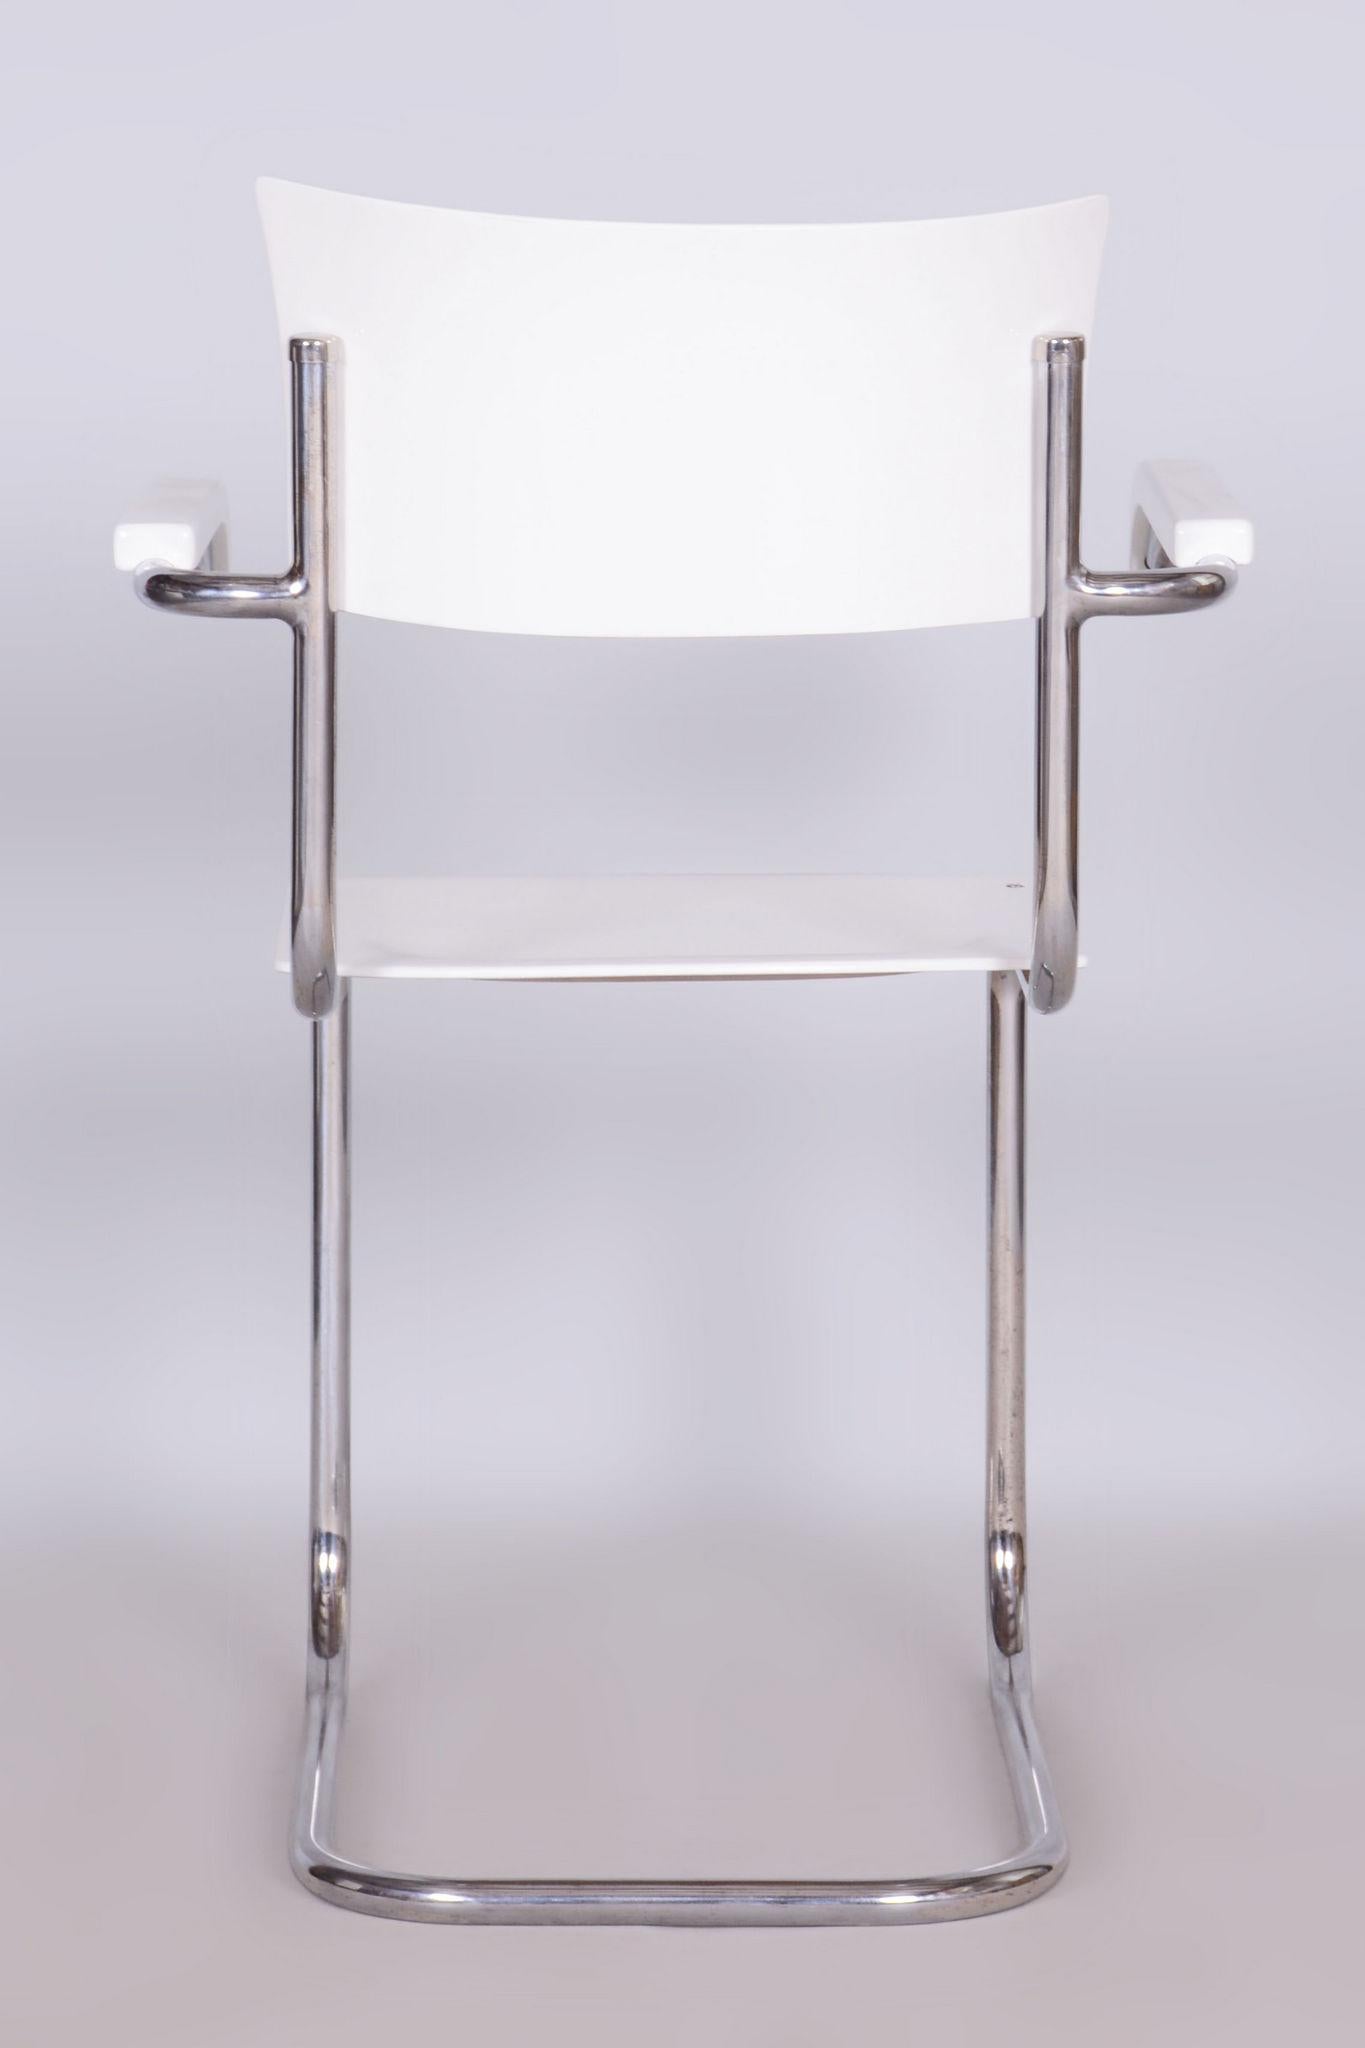 Restored Bauhaus Pair of Chairs, by Mart Stam, Chrome, Germany, 1930s For Sale 5